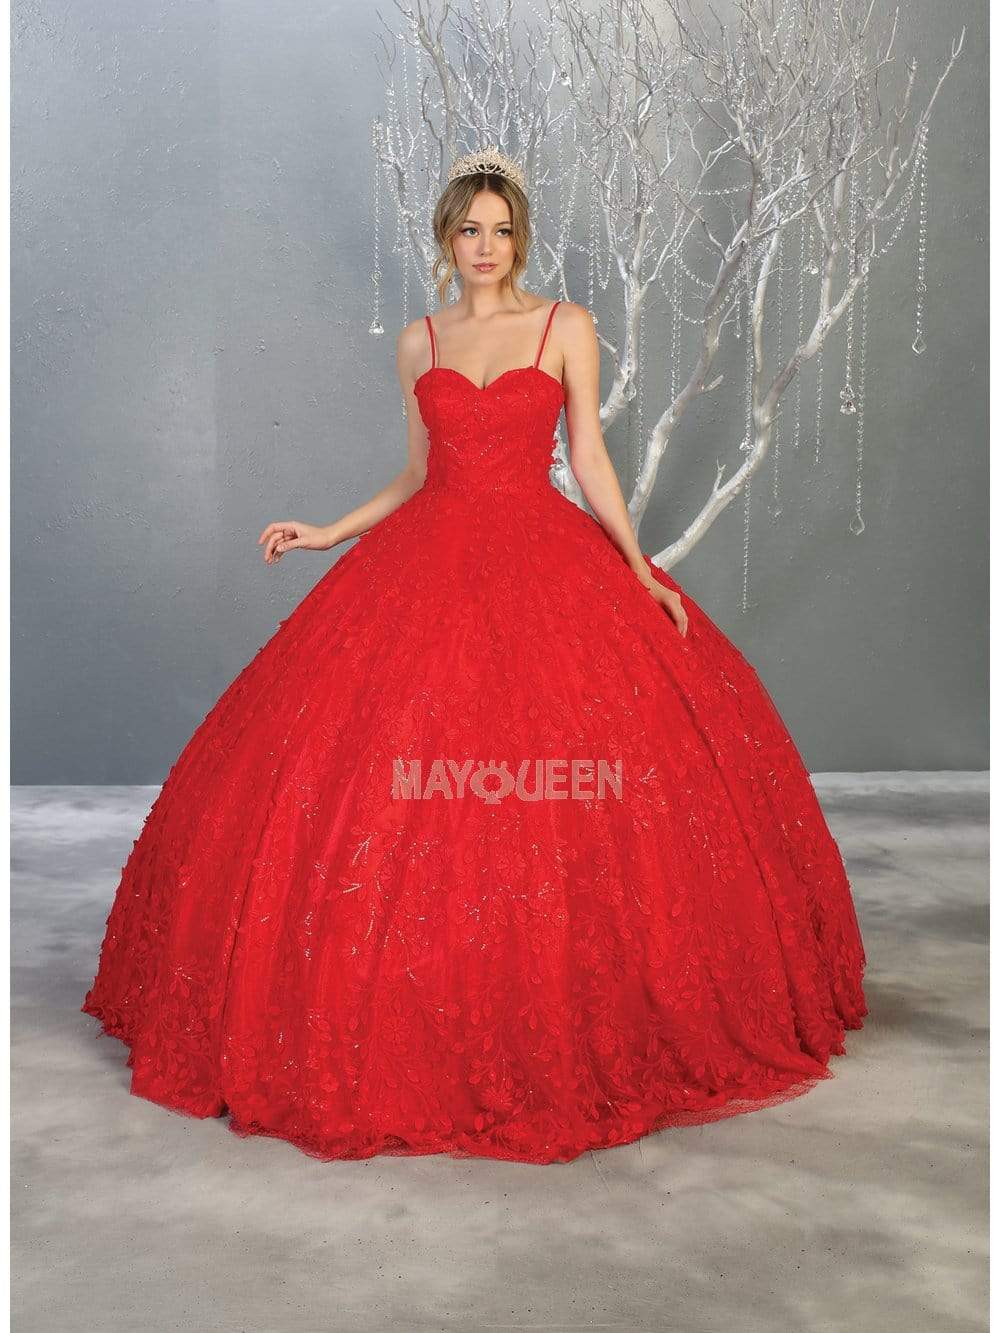 May Queen - LK150 Spaghetti Strap Embroidered Foliage Ballgown Quinceanera Dresses 4 / Red